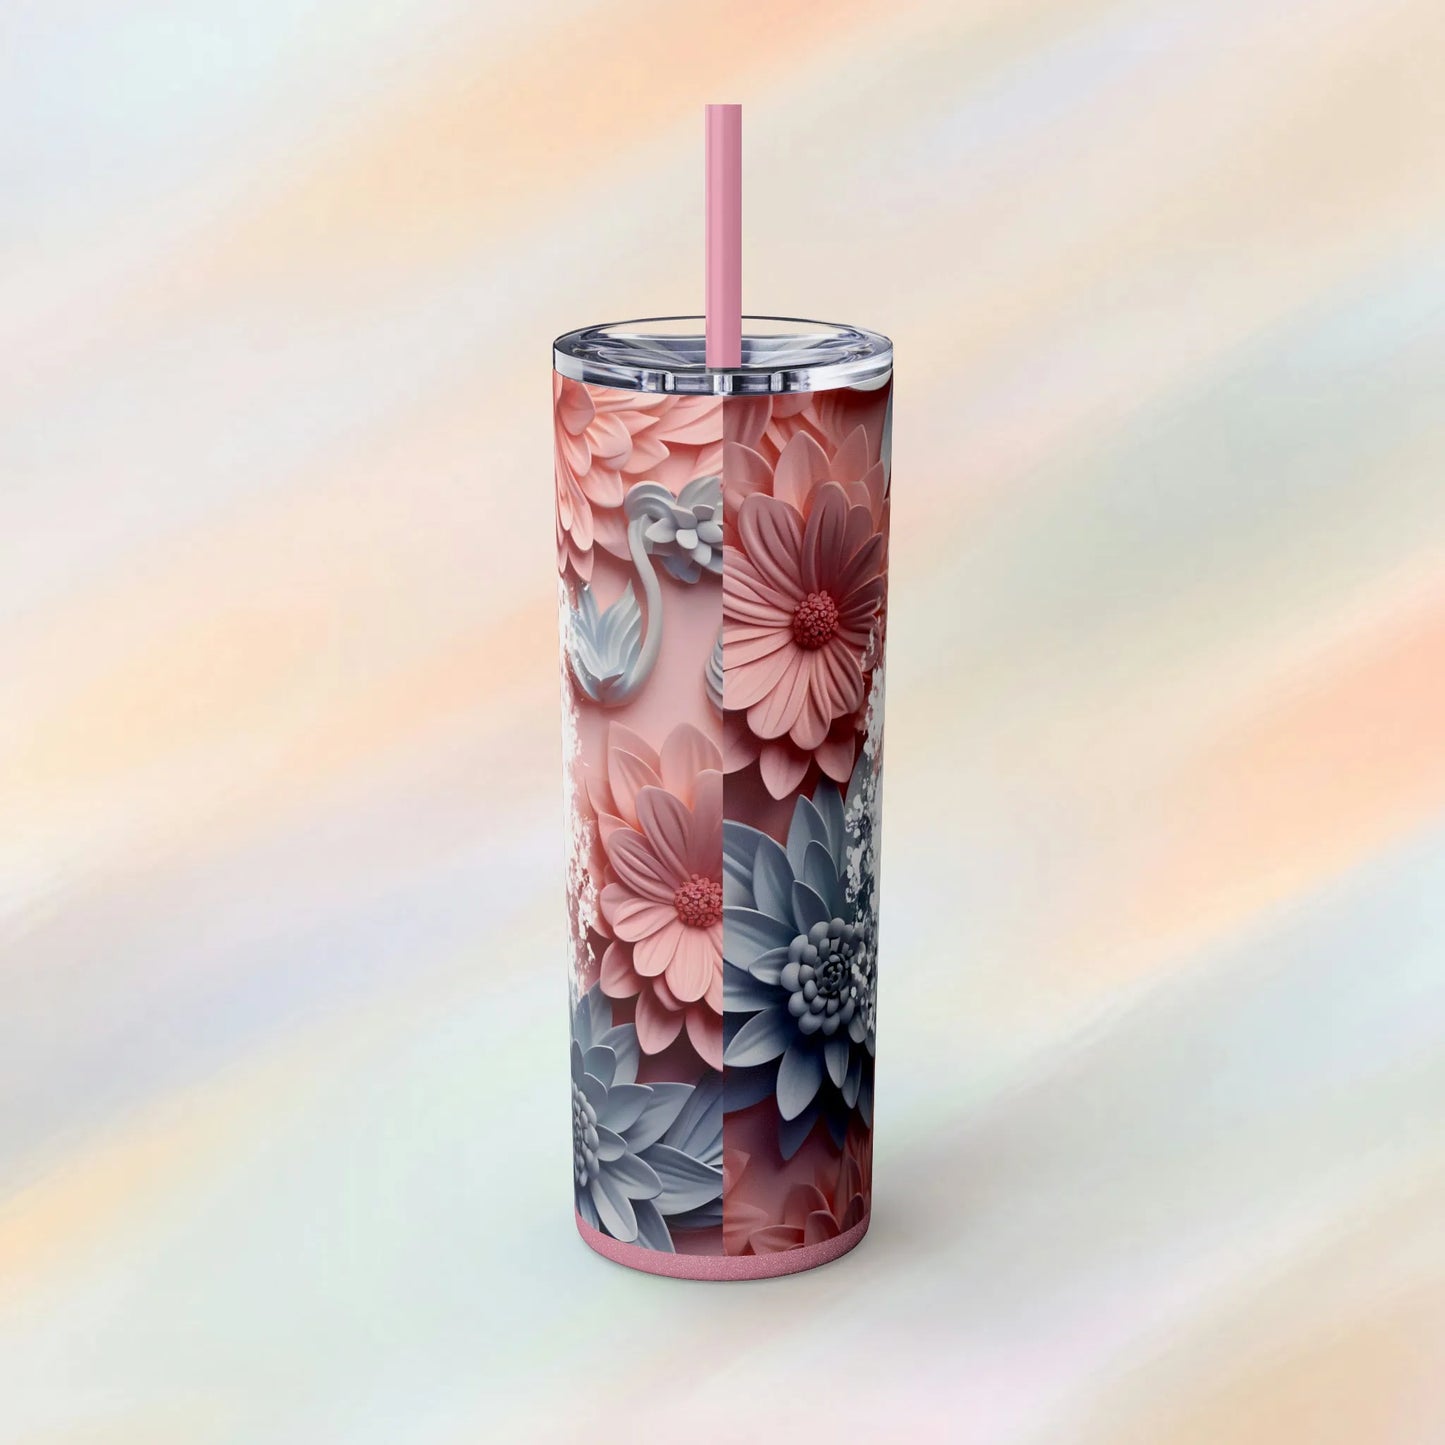 I Don't Have The Energy To Pretend I Like You Today Skinny Tumbler with Straw, 20oz - Floral Skinny Tumbler - Humorous Skinny Tumblers